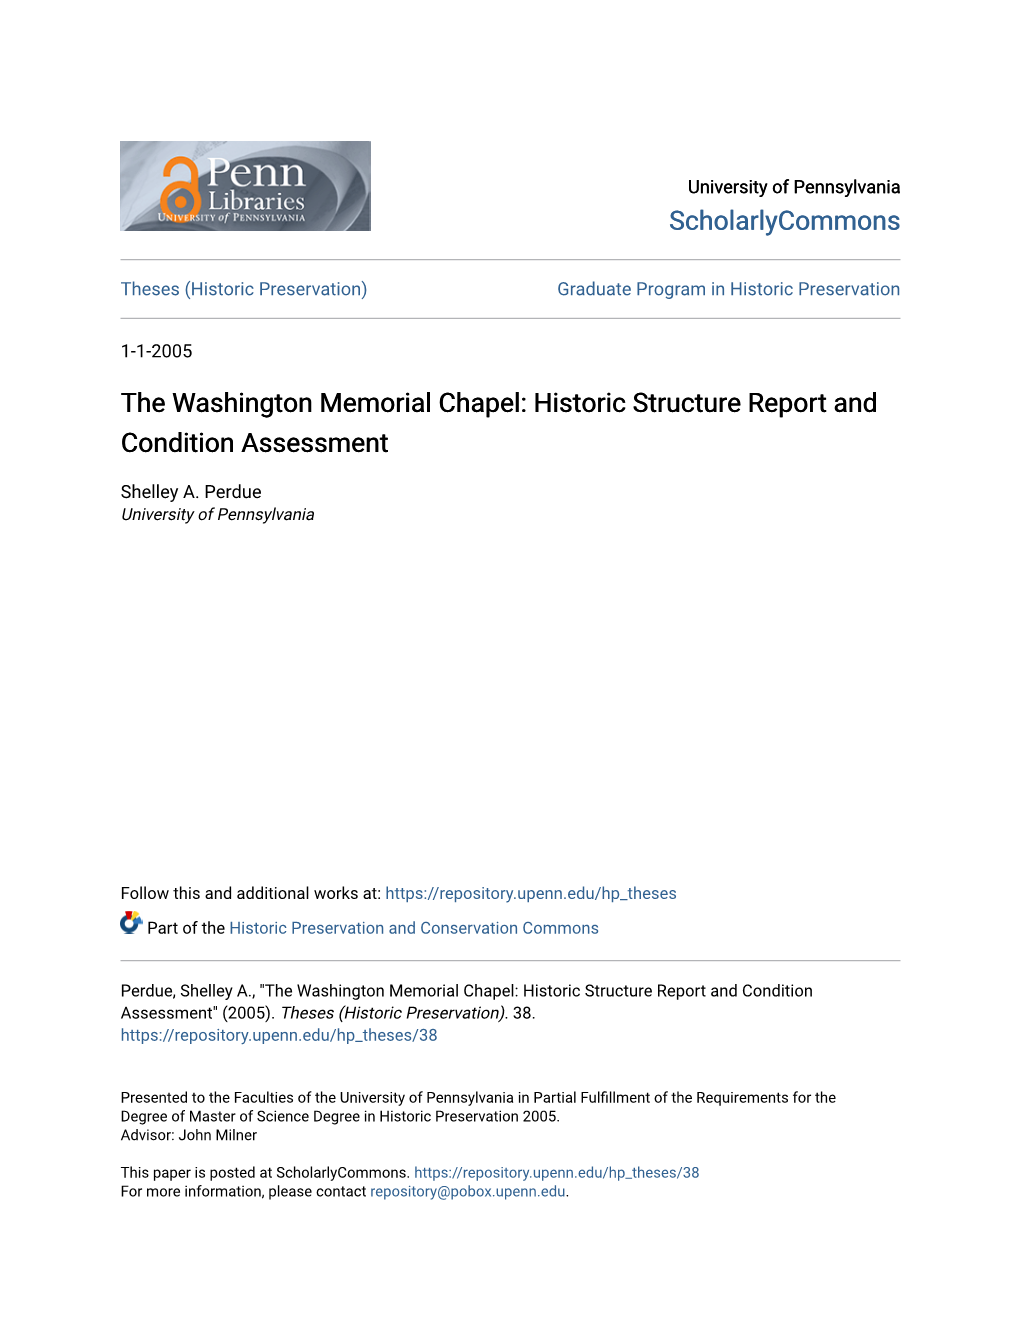 The Washington Memorial Chapel: Historic Structure Report and Condition Assessment